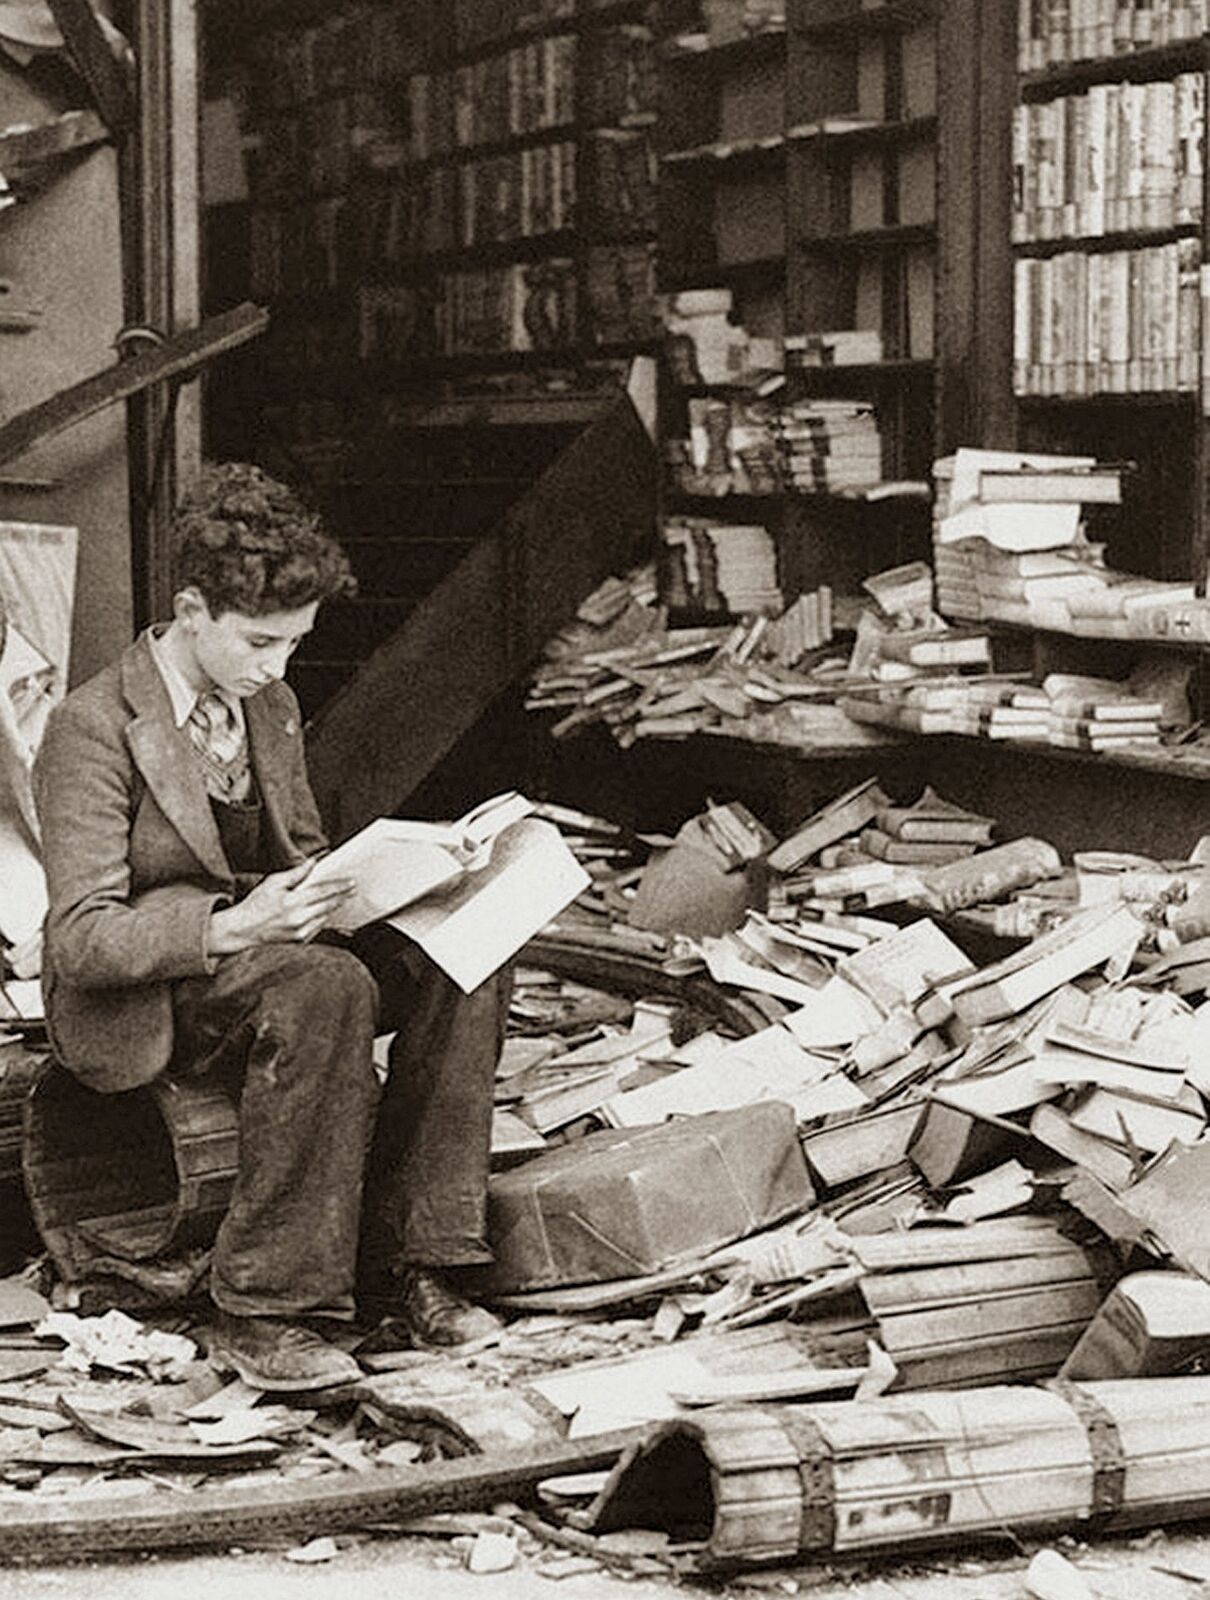 WW2 LONDON BOOK STORE BOMBED OUT Photo (213-t )